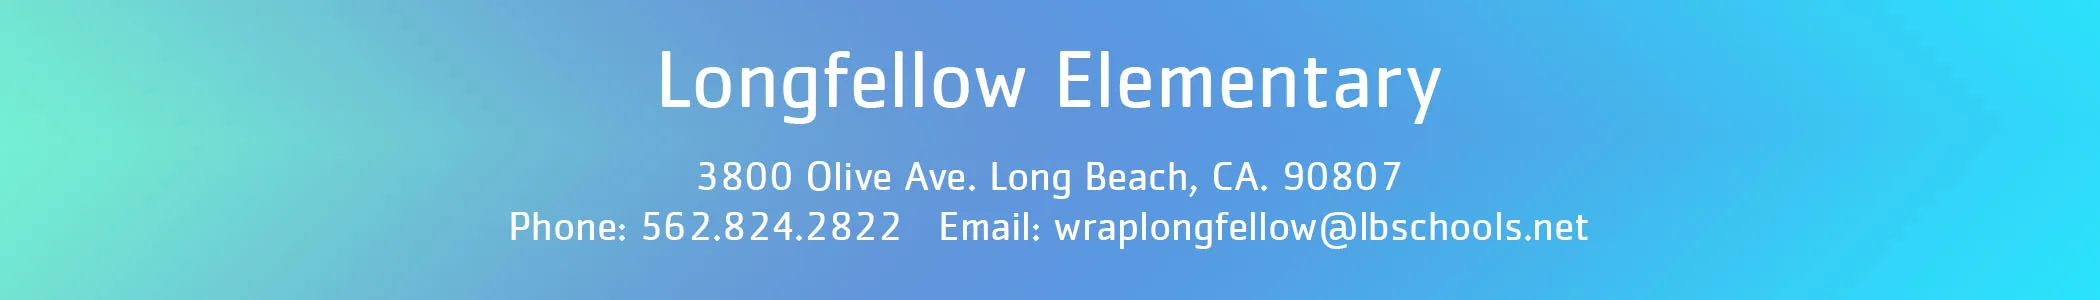 longfellow banner with site information